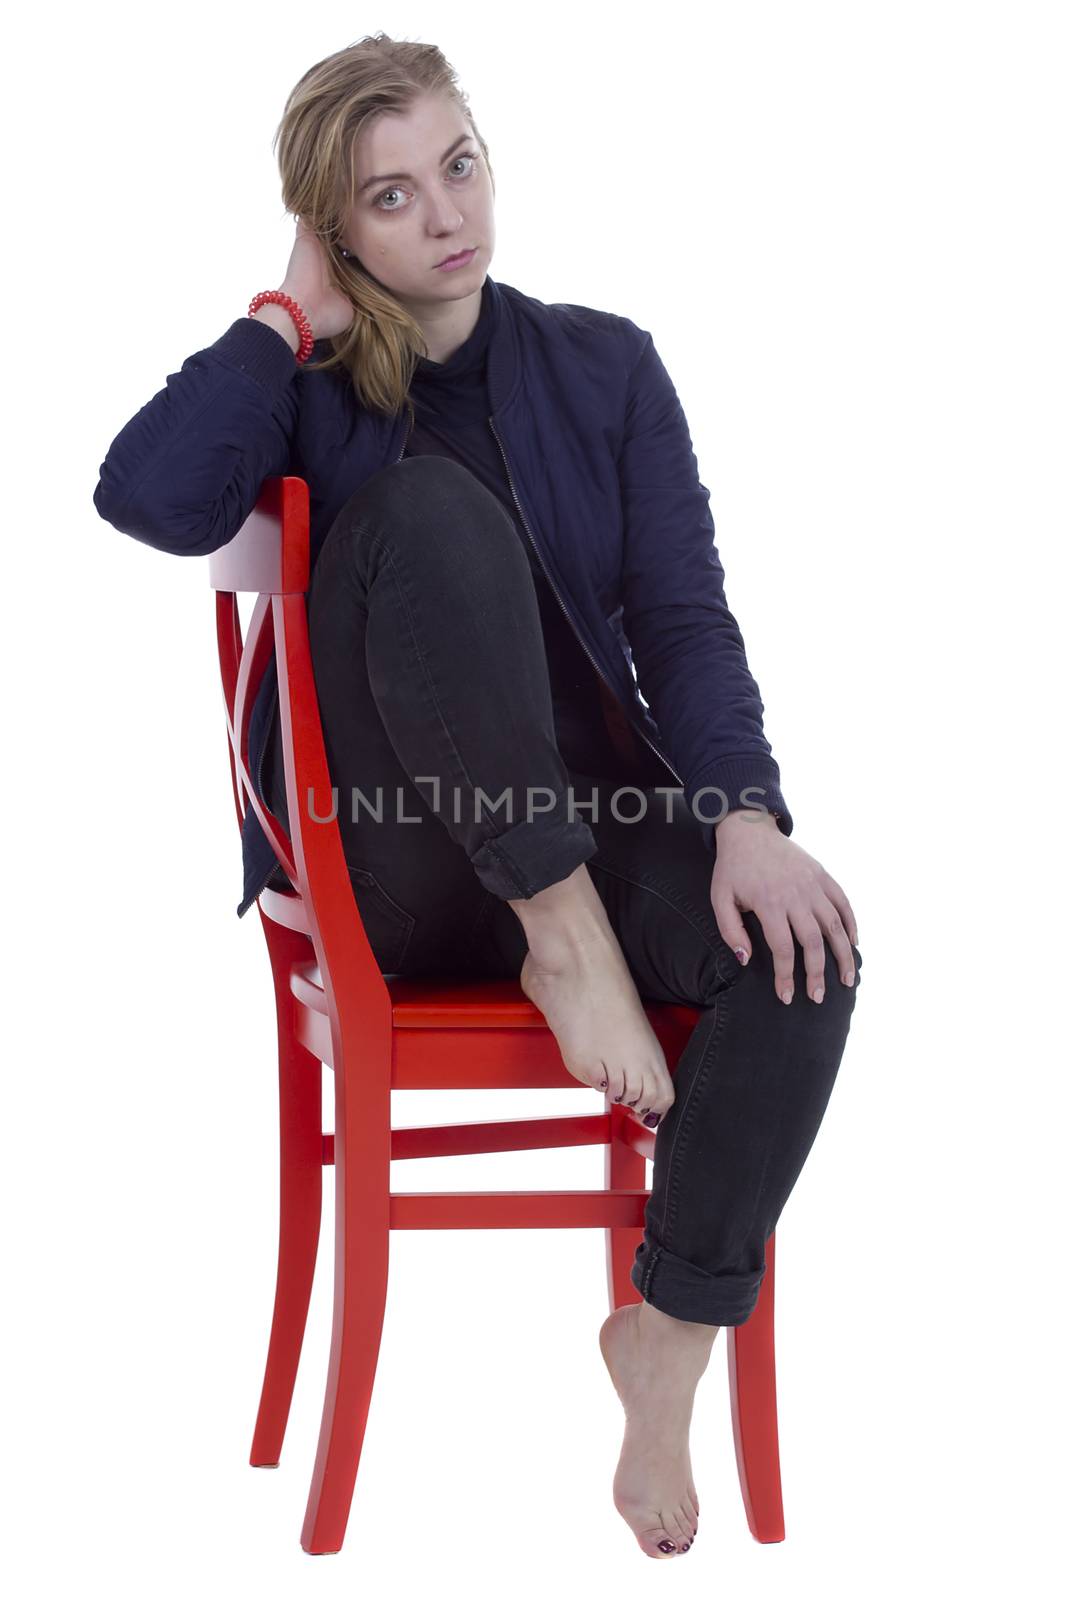 Portrait of a young woman on a red chair